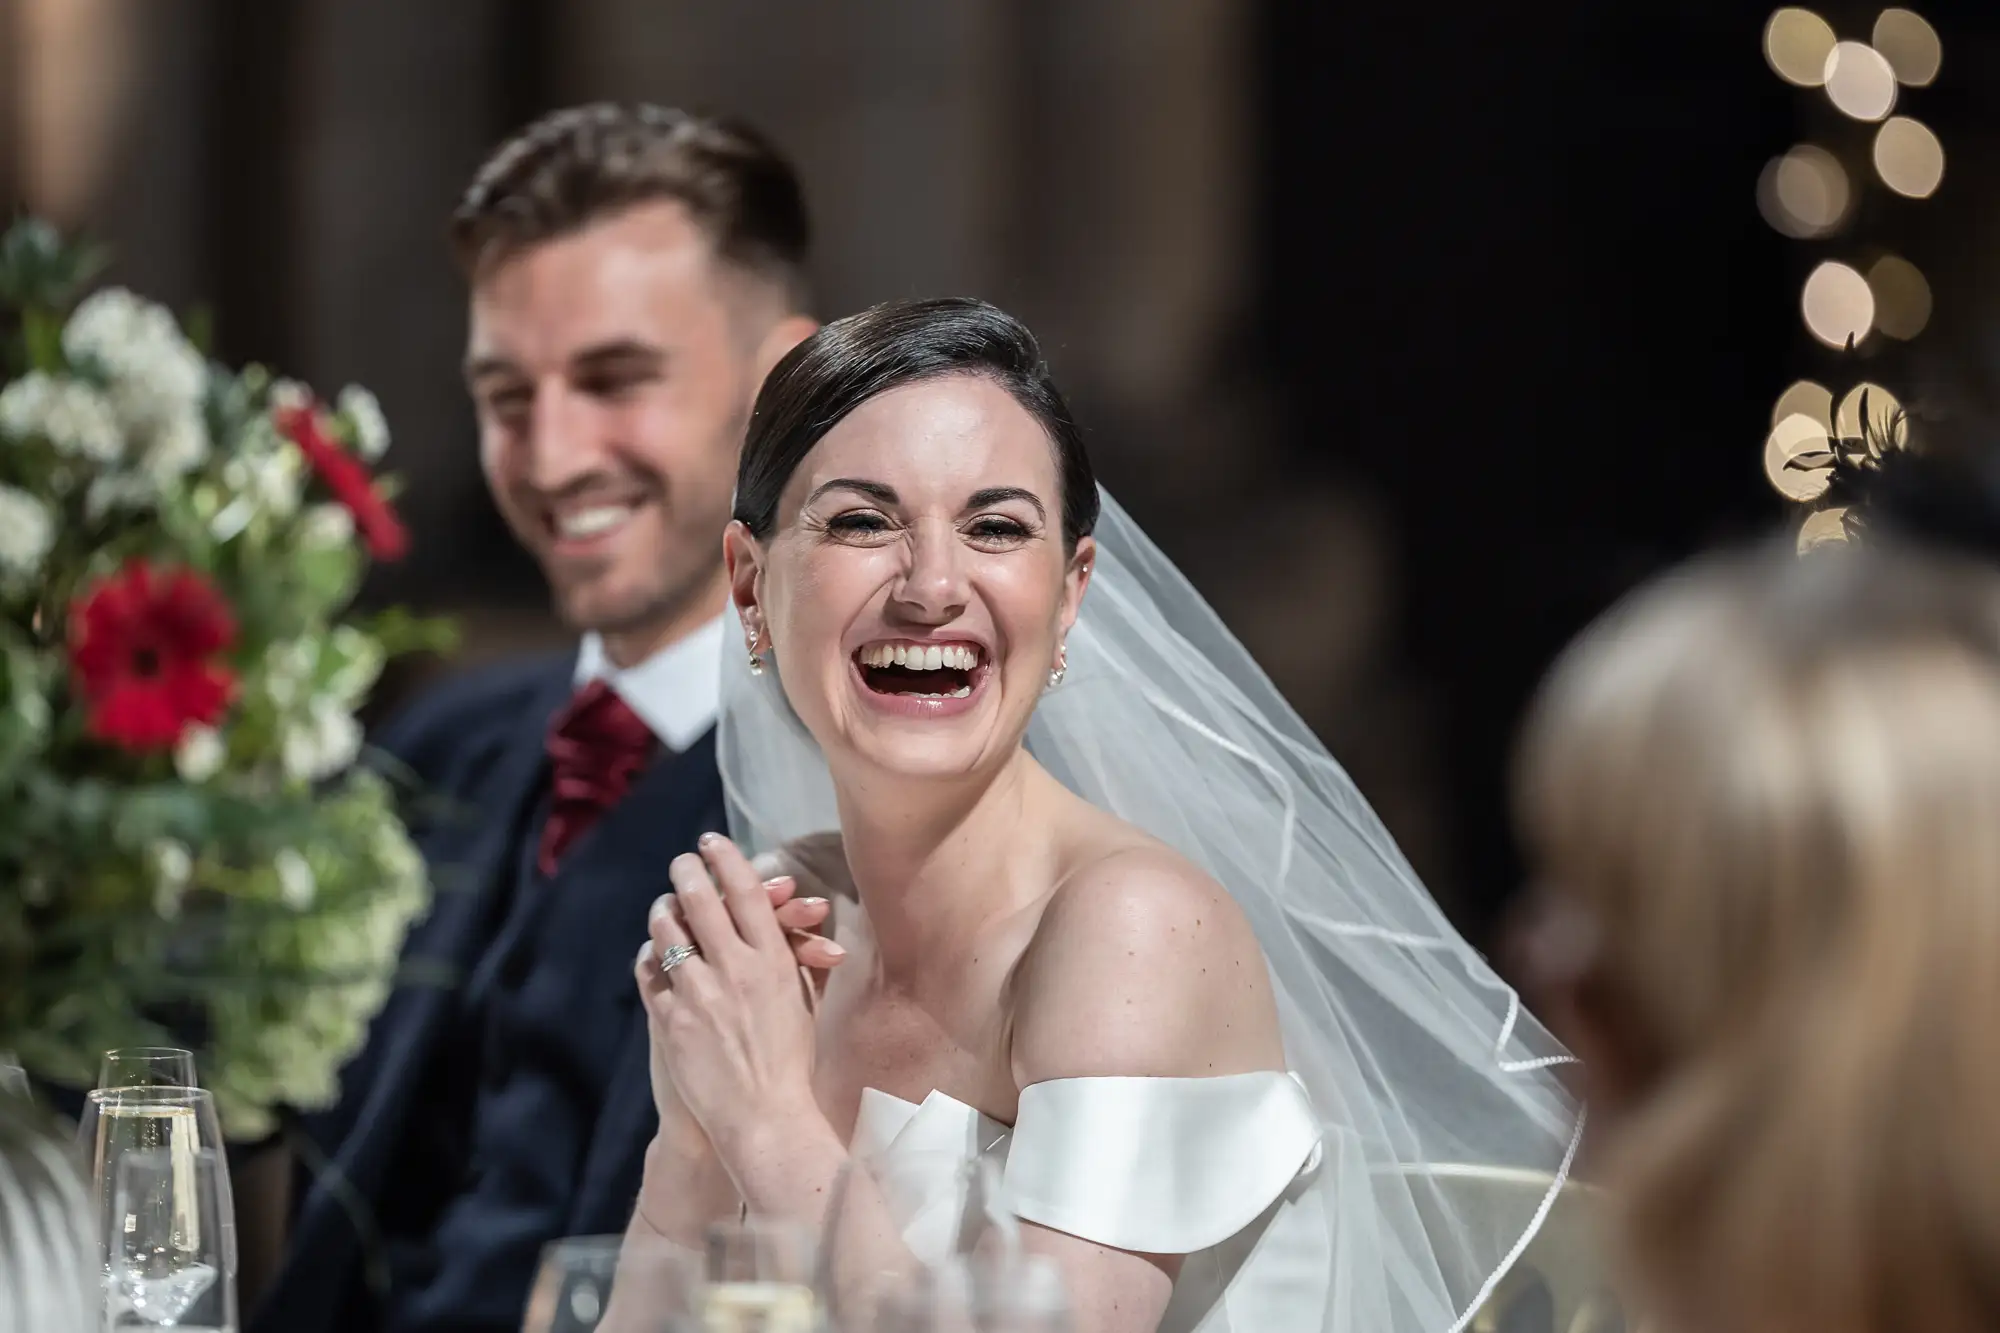 A bride in a white off-the-shoulder dress and veil laughing joyfully beside a smiling groom in a navy suit during a wedding reception.